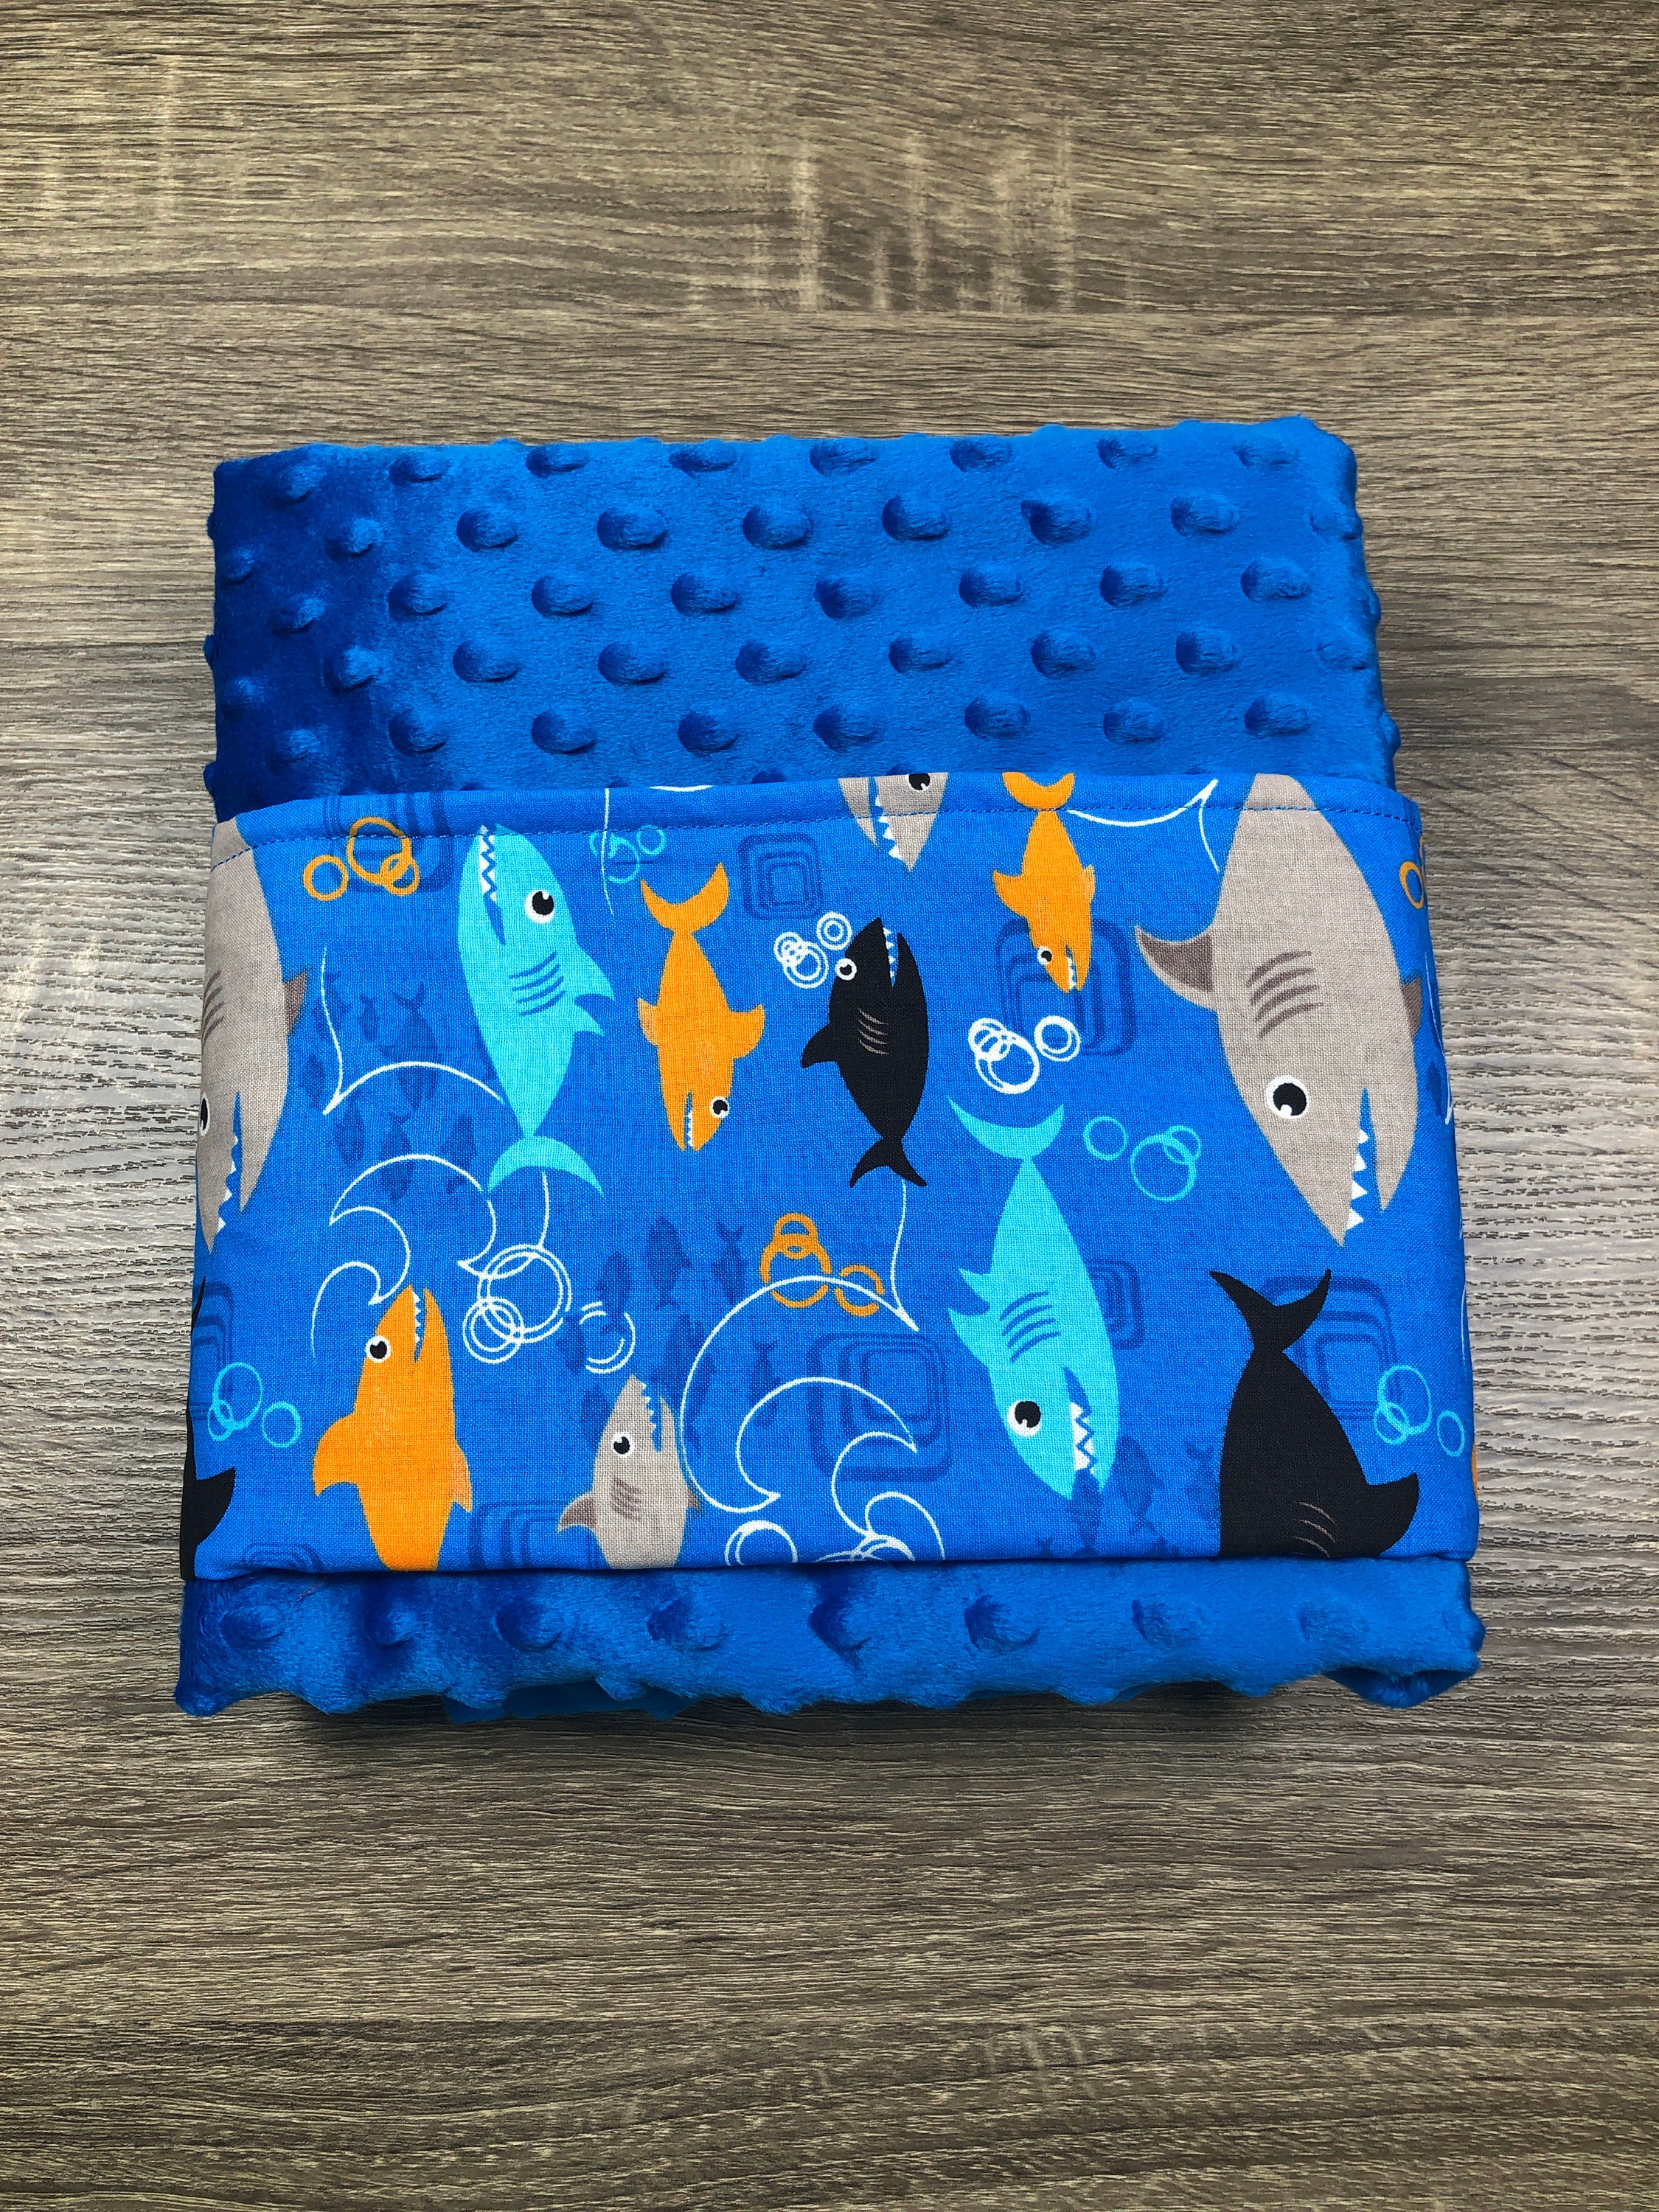 Sharks Weighted Blanket, Child Size Weighted Blanket, Baby Sharks Theme